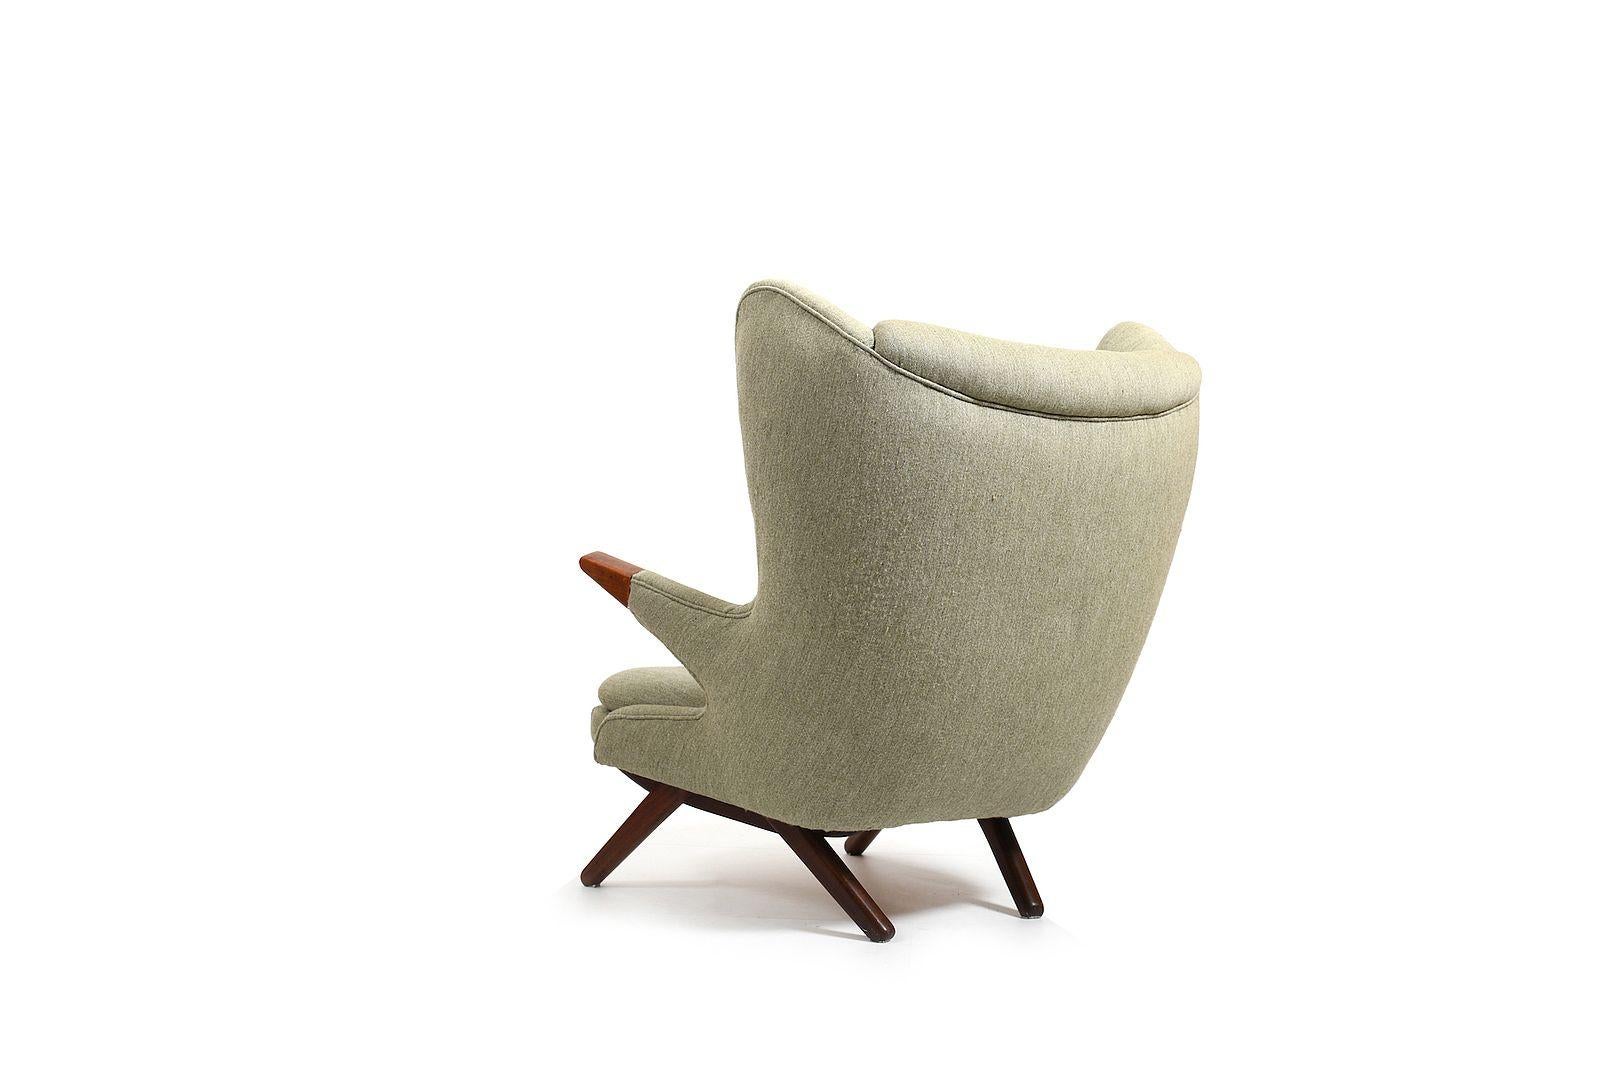 Old bear lounge chair (Bamsestol), model no.91 by Svend Skipper for Skippers Møbler Denmark 1950s. End of armrests and base in solid teak. Original upholstery with light green wool fabric. Early production.